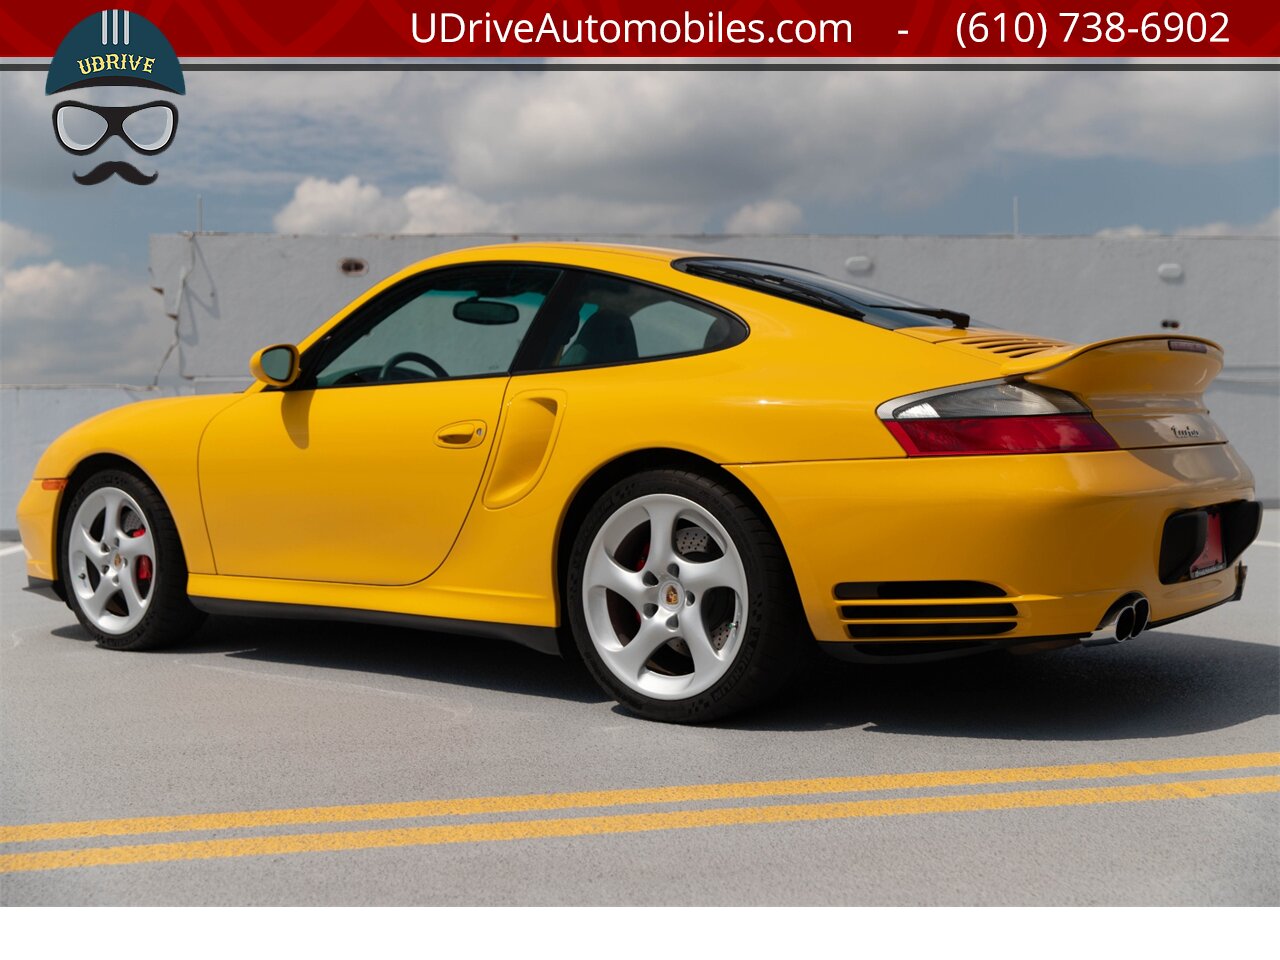 2003 Porsche 911 996 Turbo X50 6Sp Nephrite Green Lthr 9k Miles  Deviating Yellow Stitching Collector Grade BACK AGAIN - Photo 20 - West Chester, PA 19382